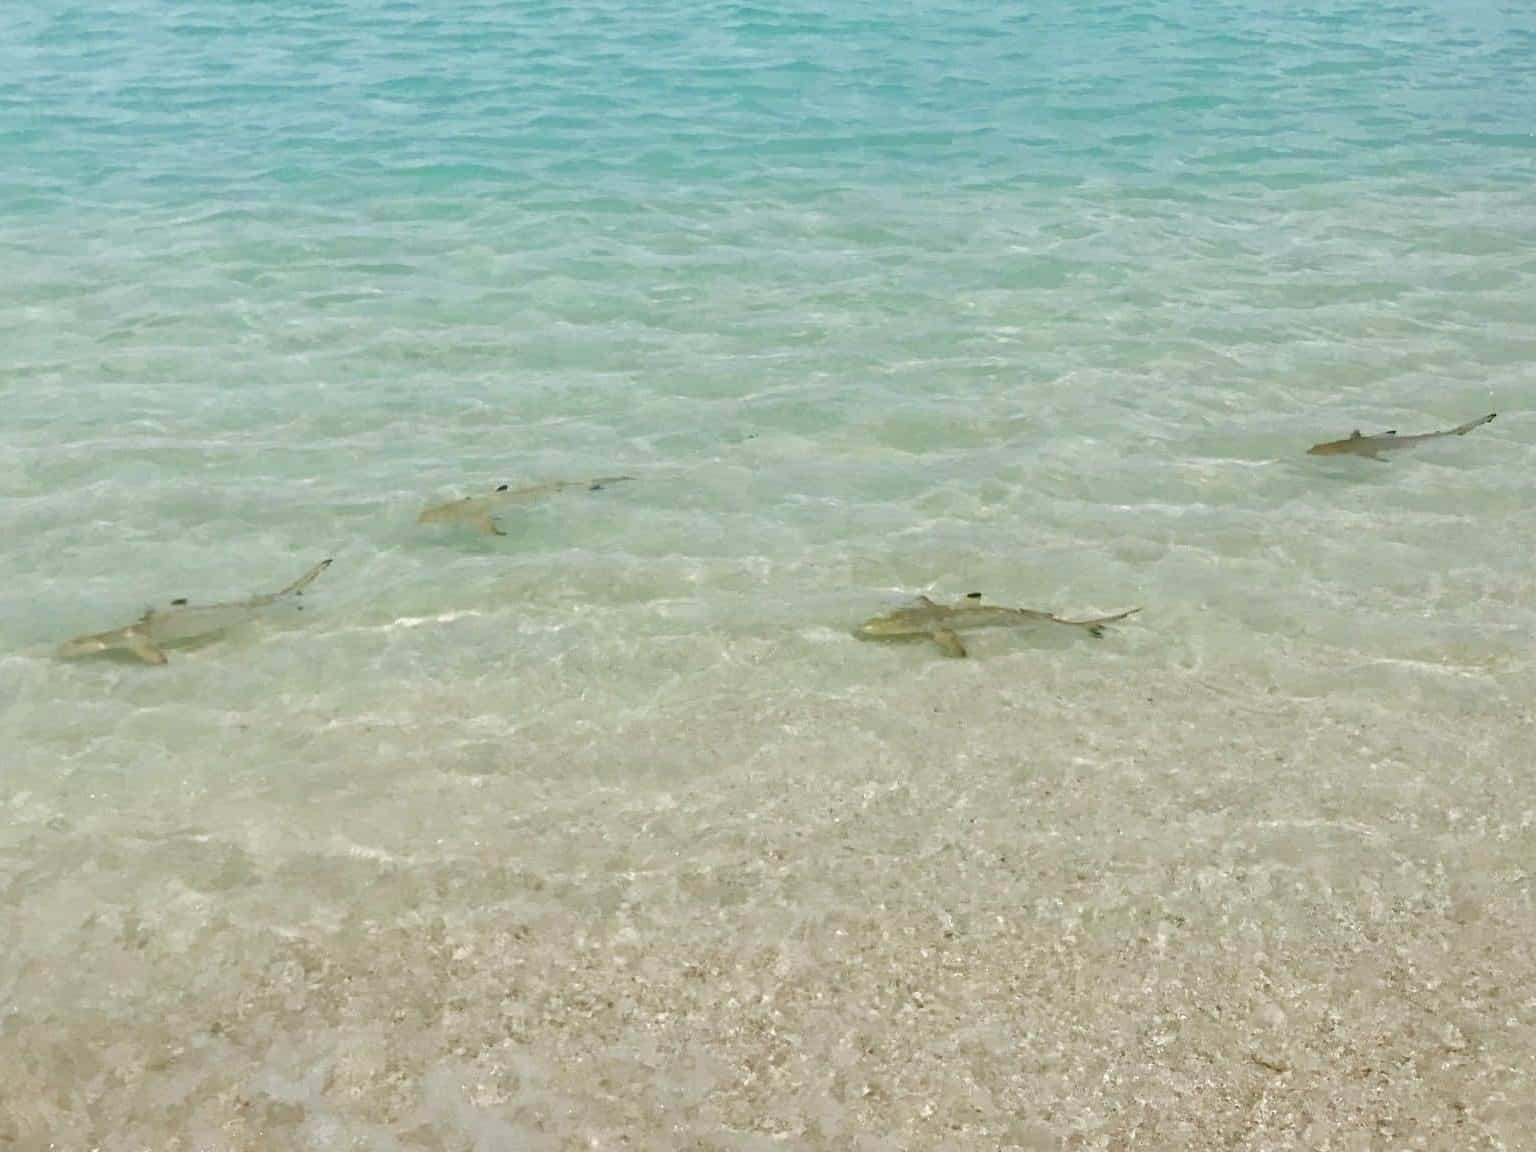 Shark species in the Maldives – dangerous for holidaymakers when swimming?